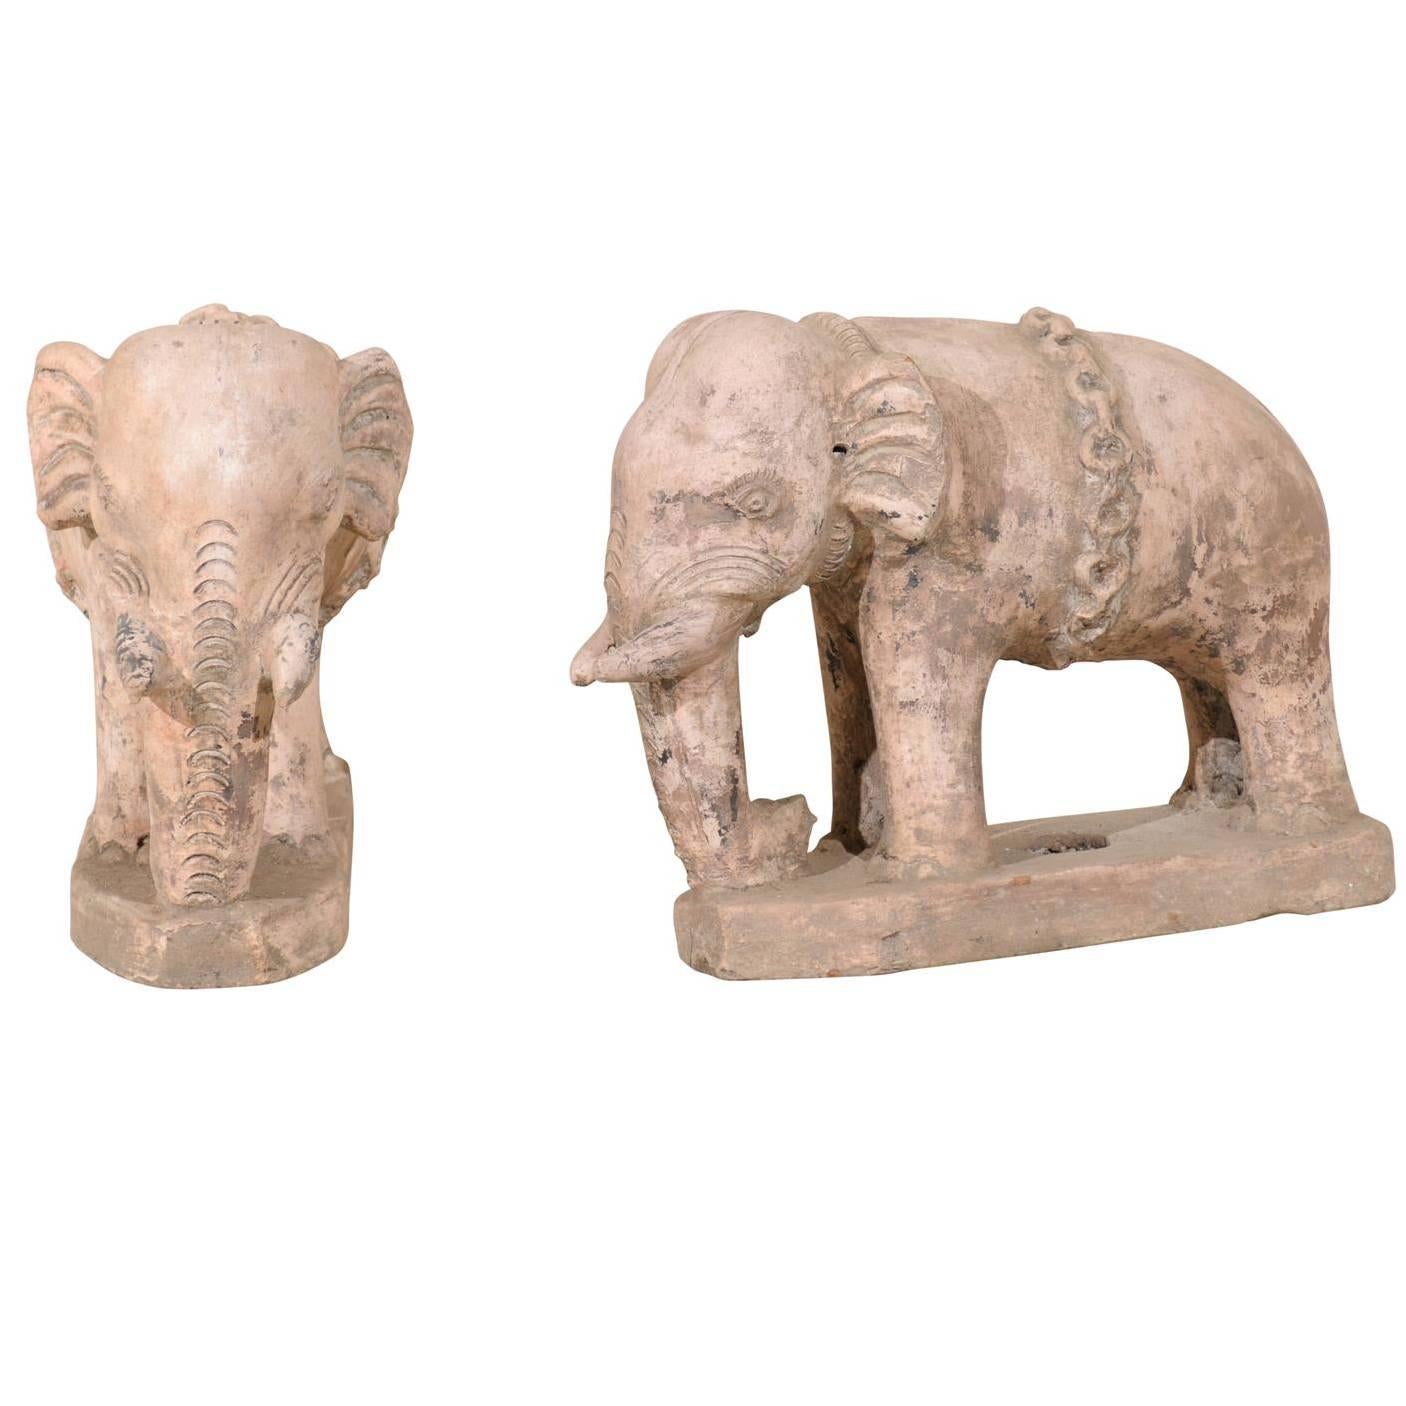 Pair of Eclectic 20th Century British Colonial Terracotta Elephants in Pale Pink